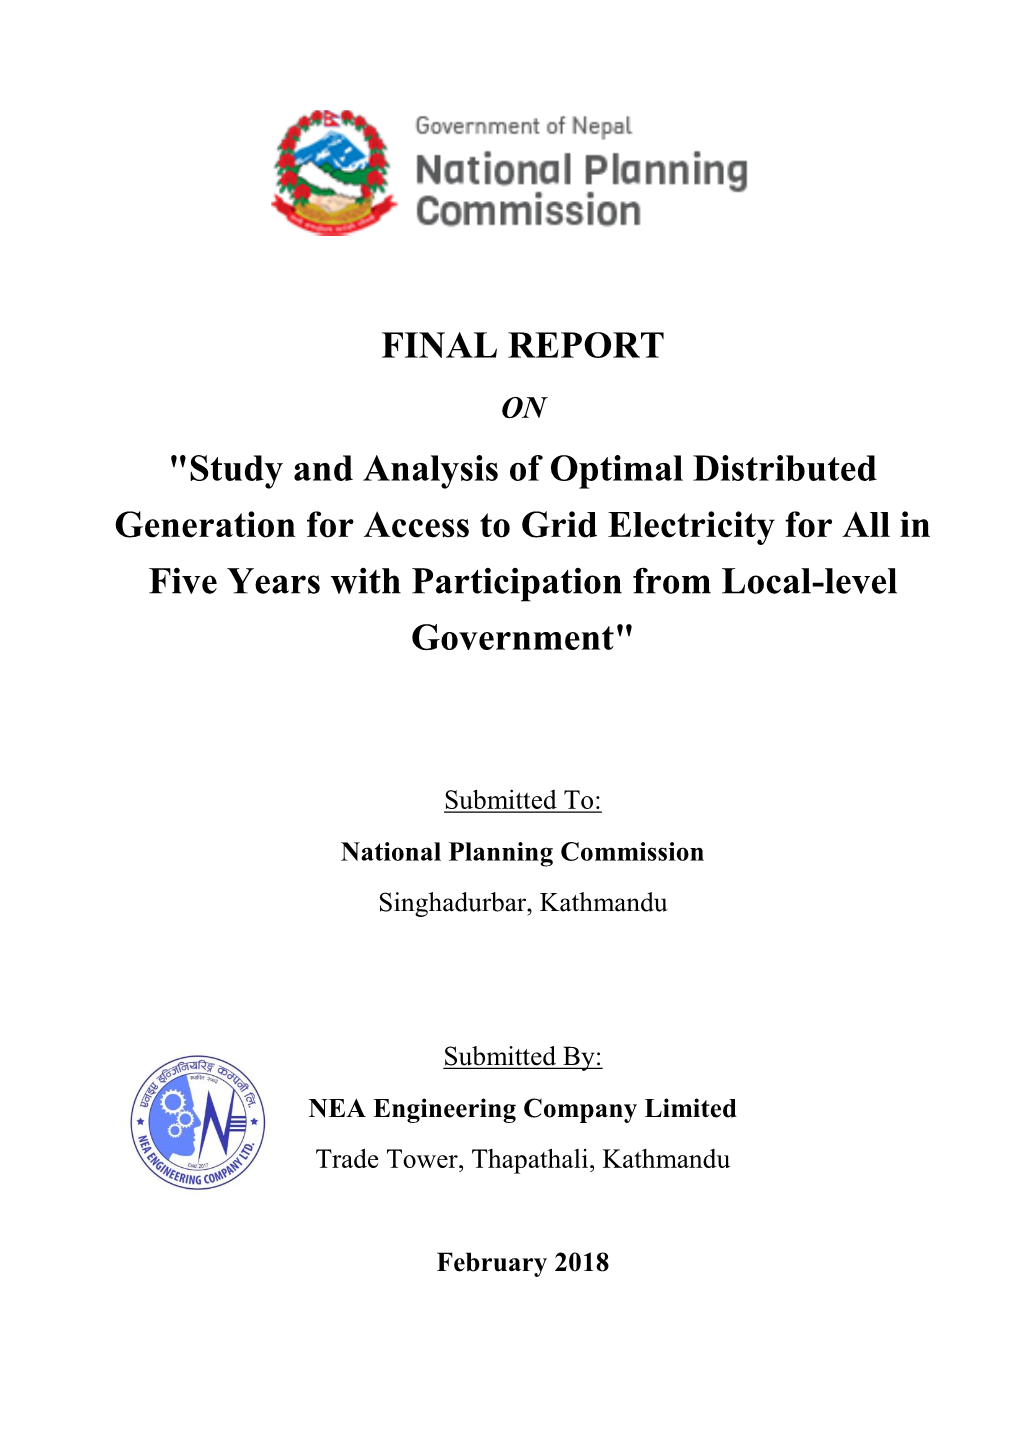 Study and Analysis of Optimal Distributed Generation for Access to Grid Electricity for All in Five Years with Participation from Local-Level Government"